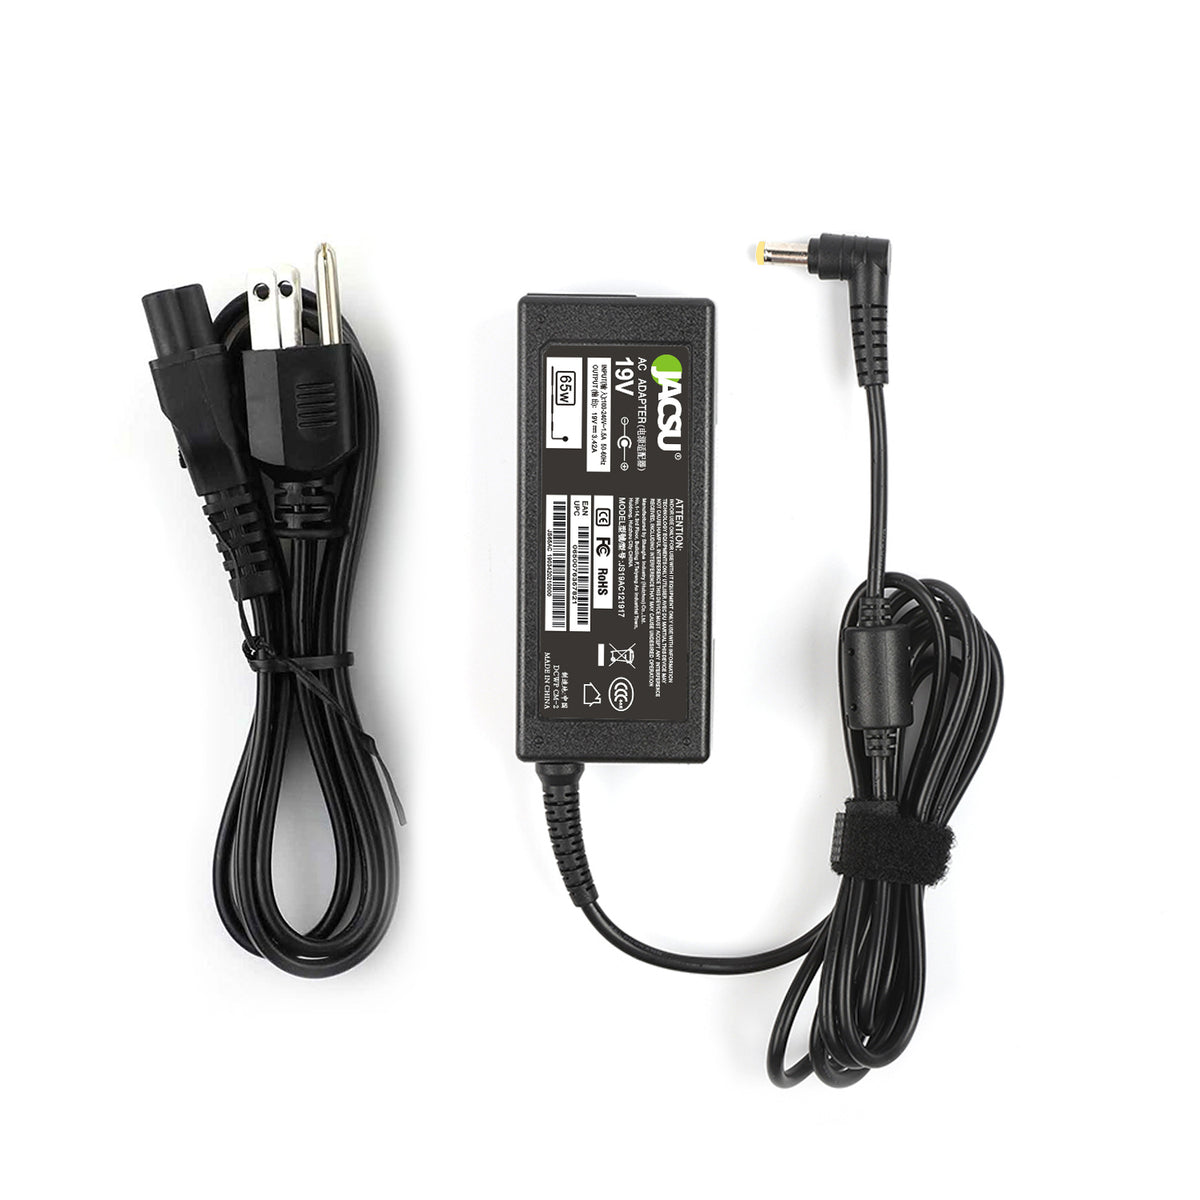 Jacsu 19V 3.42A 65W 5.5x2.5mm AC Laptop Adapter Charger for Asus X401A A450C Y481 X501LA X551C V85 A52F